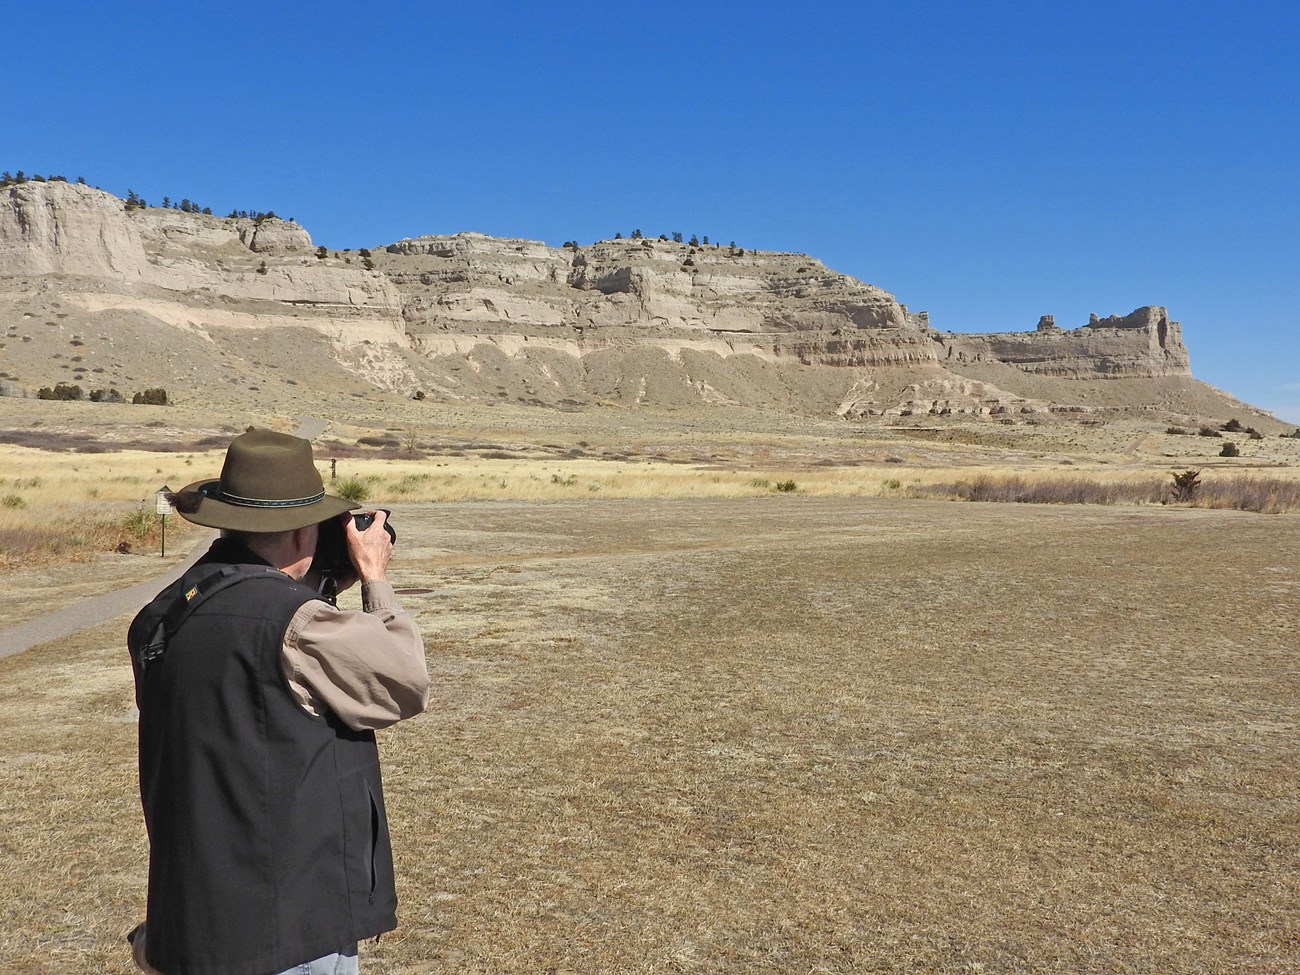 A man takes a photo of distant bluffs with a digital SLR camera.